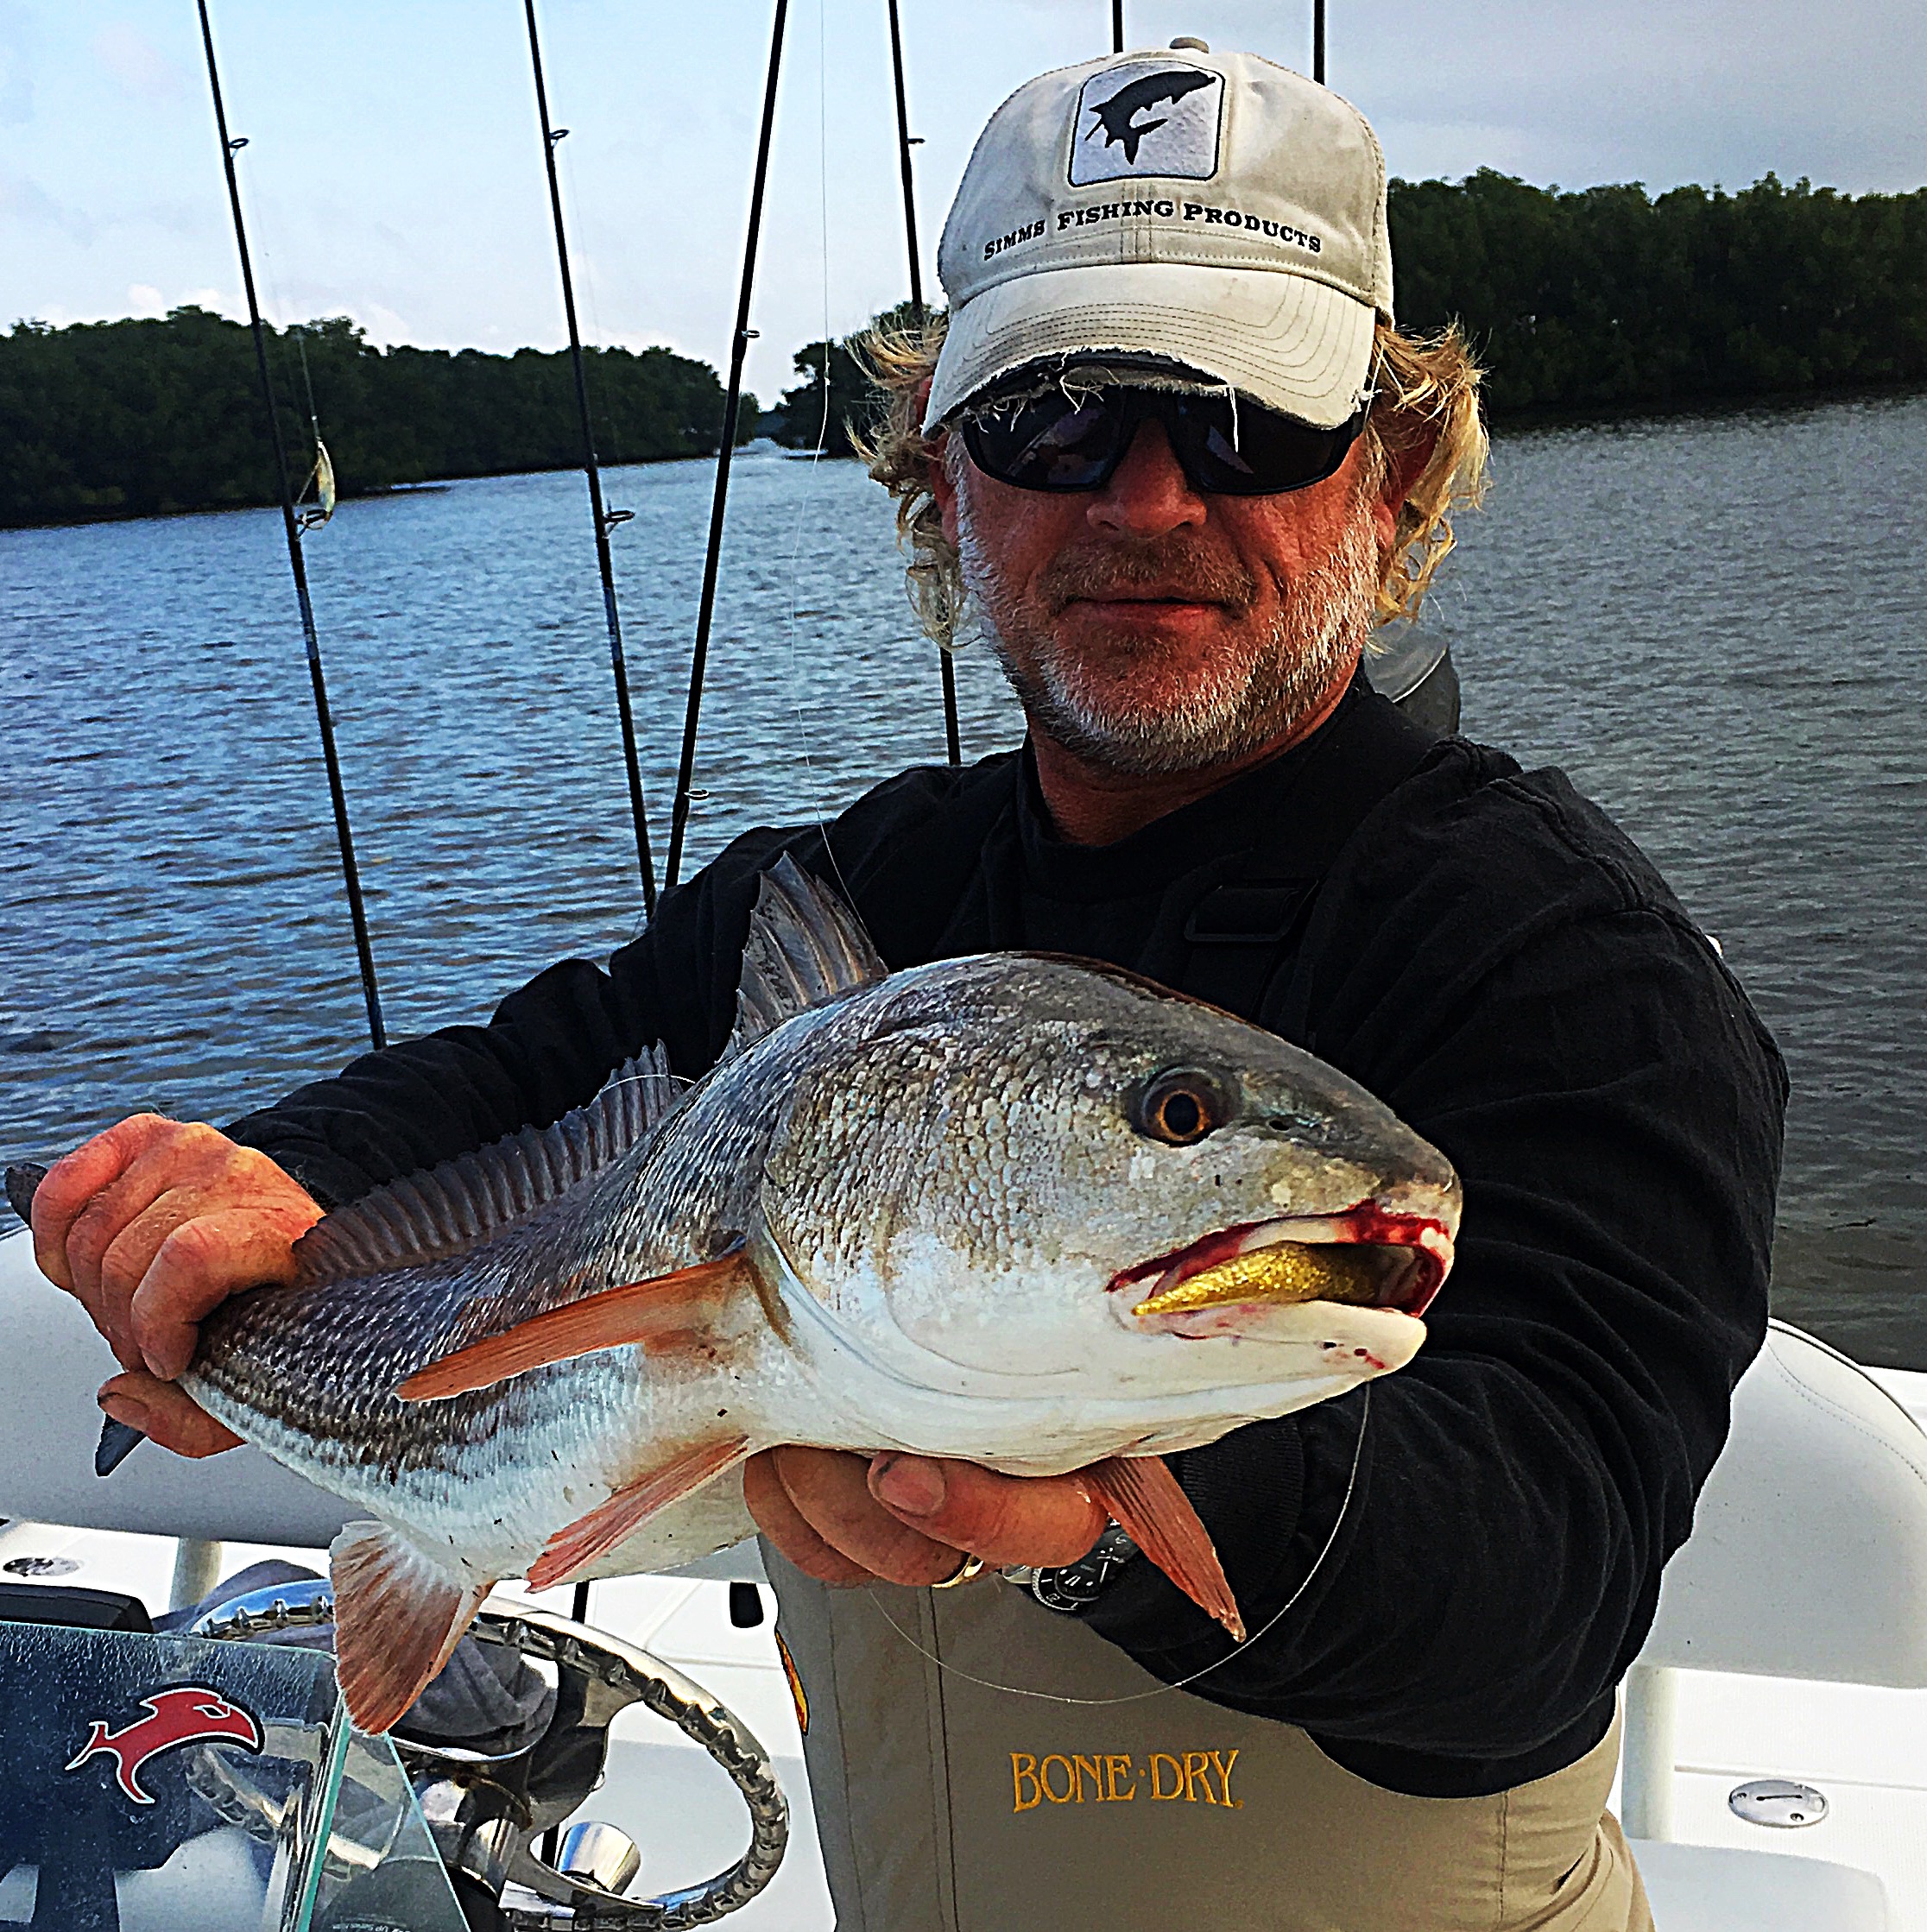 Tampa Fishing charters, things to do in tampa, tampa bay fishing charters, fishing charters in tampa bay, fishing charters tampa, hula bay fishing charters, south tampa fishing charters